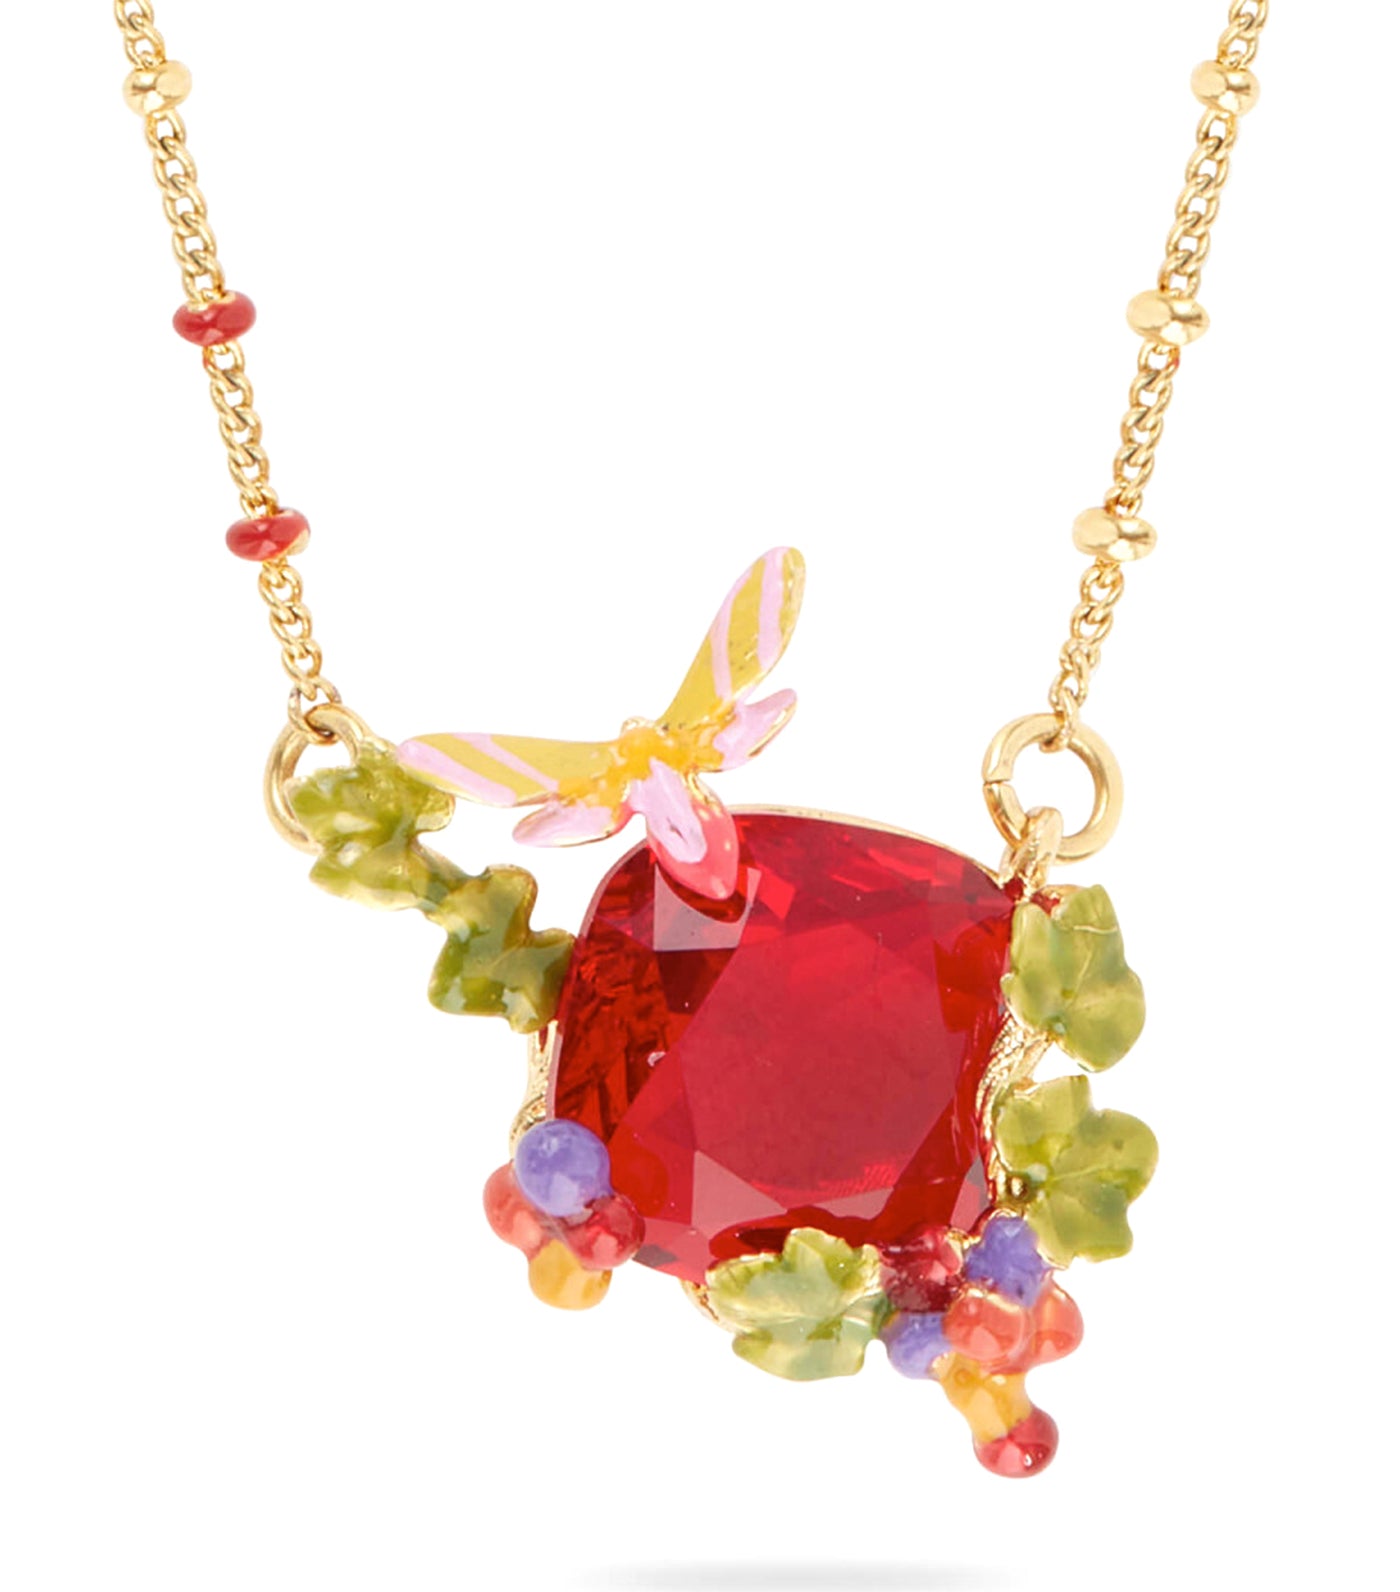 Garnet Red Faceted Stone Necklace